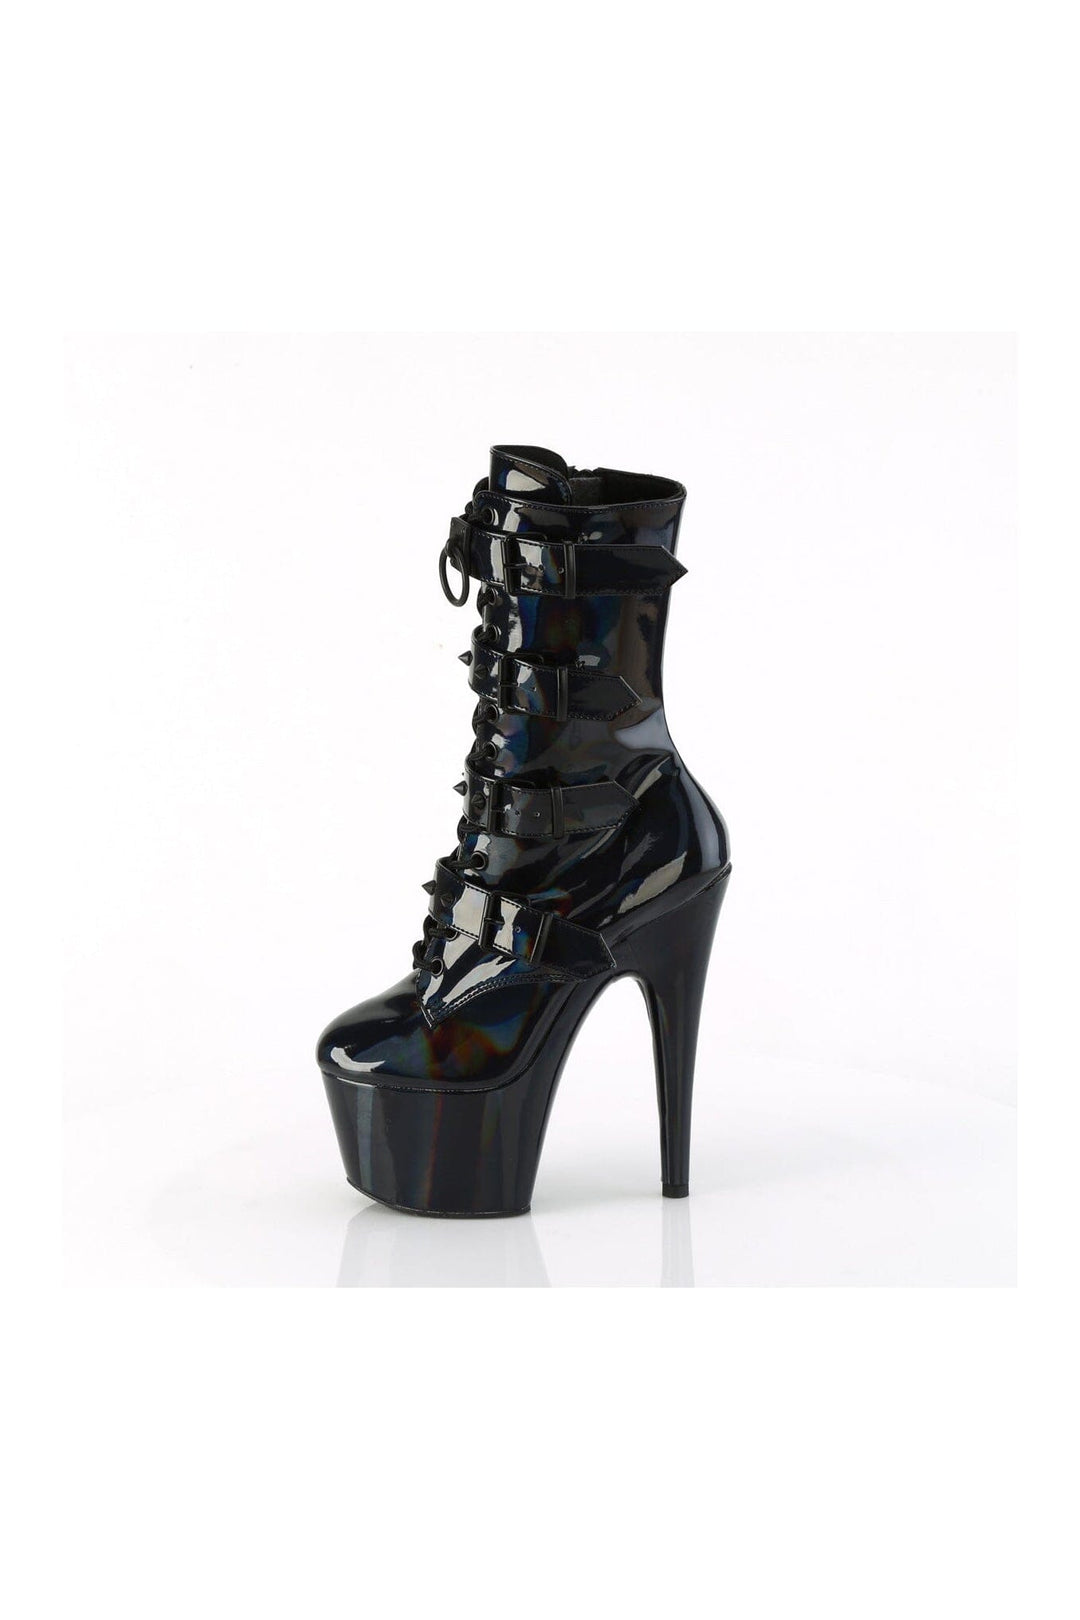 ADORE-1046 Black Patent Ankle Boot-Ankle Boots-Pleaser-SEXYSHOES.COM